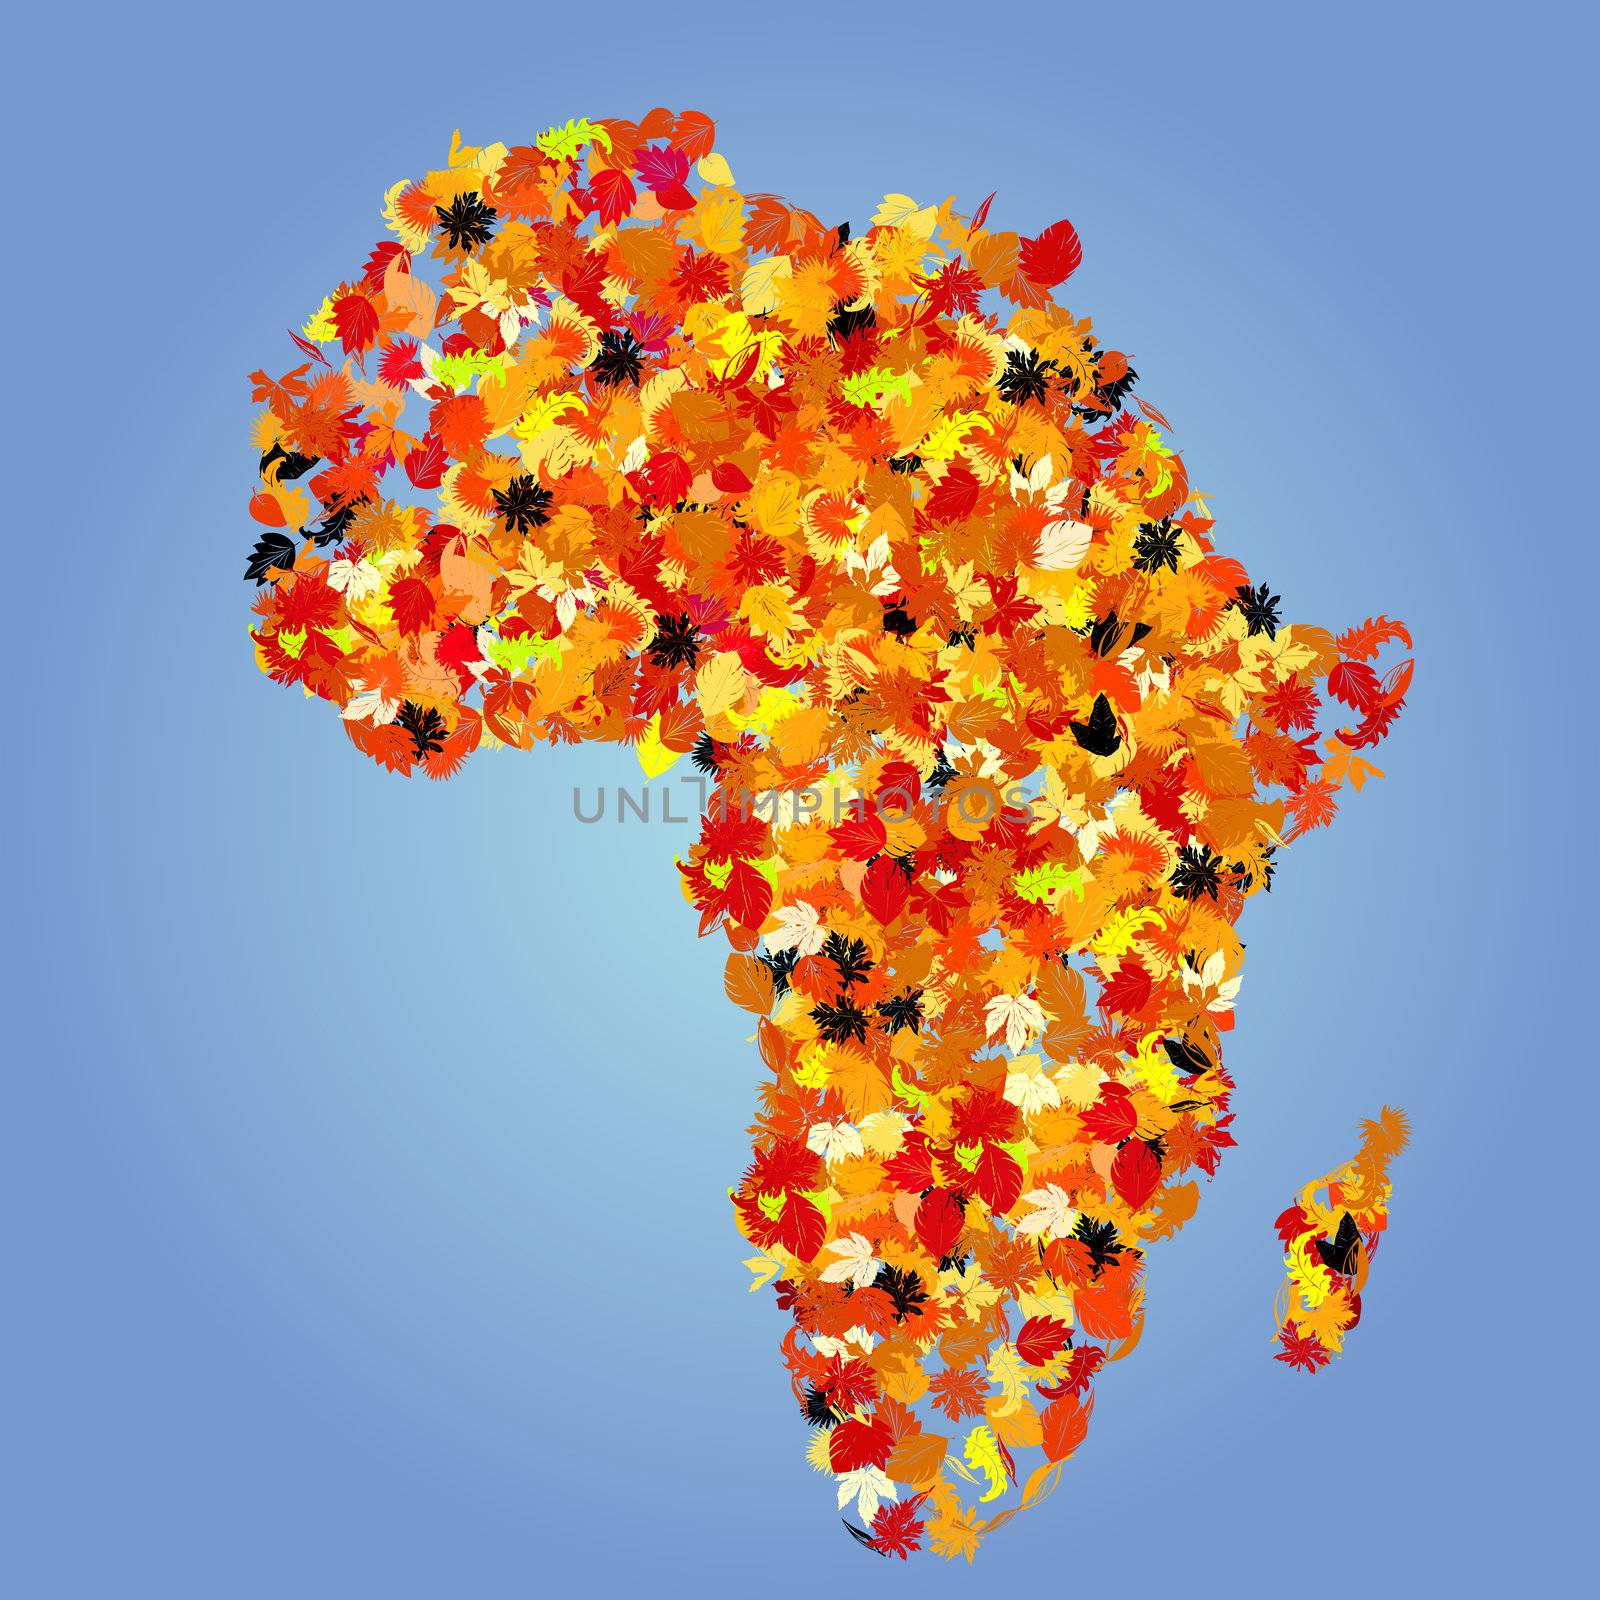 Africa map, autumn leaves collage